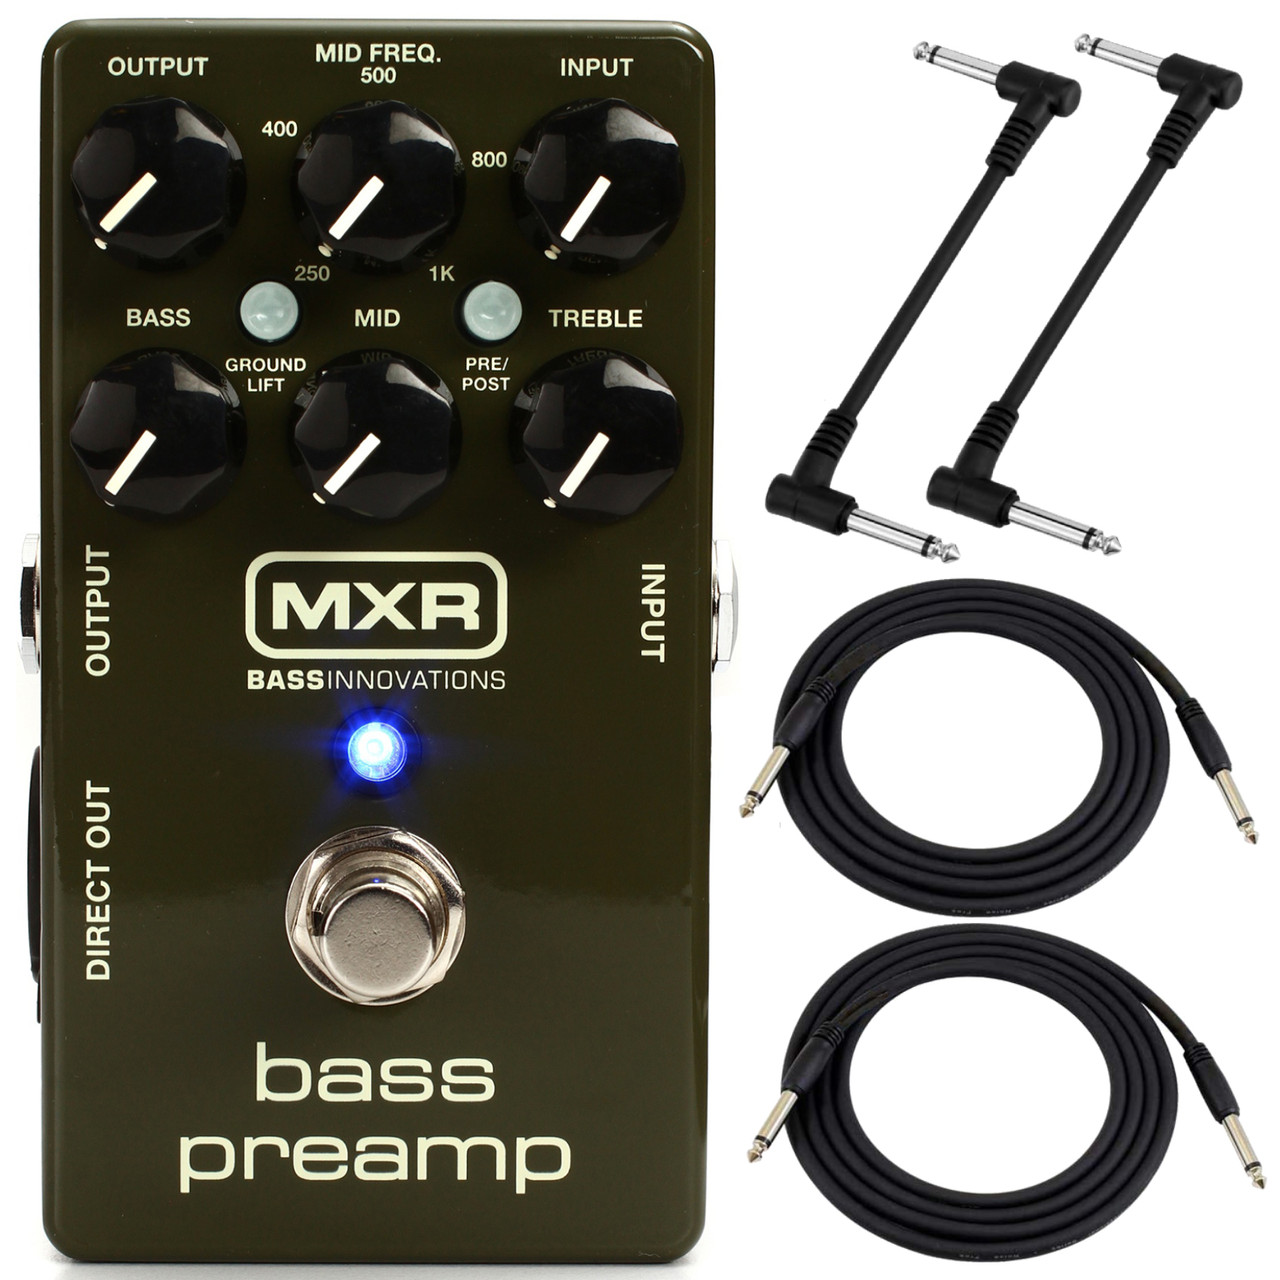 MXR M81 Bass Guitar Preamp Pedal with 3-Band EQ, Cable Bundle